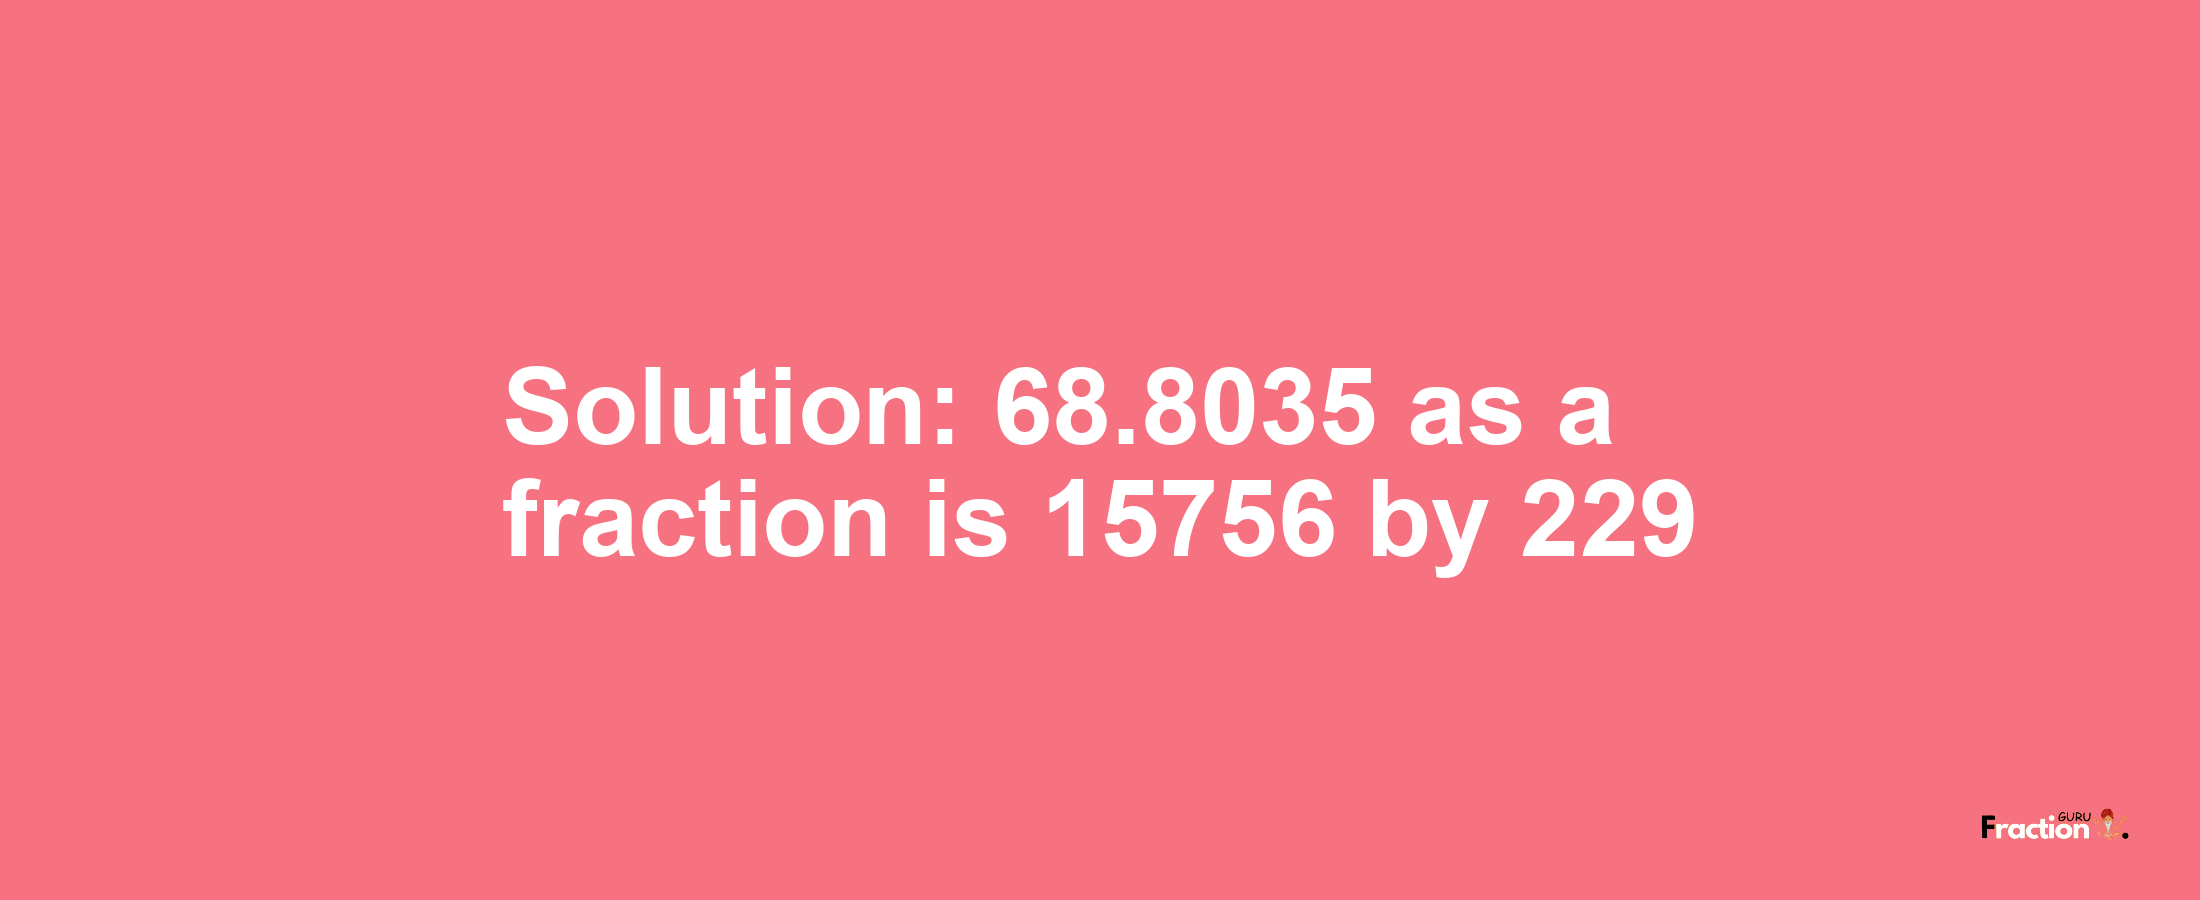 Solution:68.8035 as a fraction is 15756/229